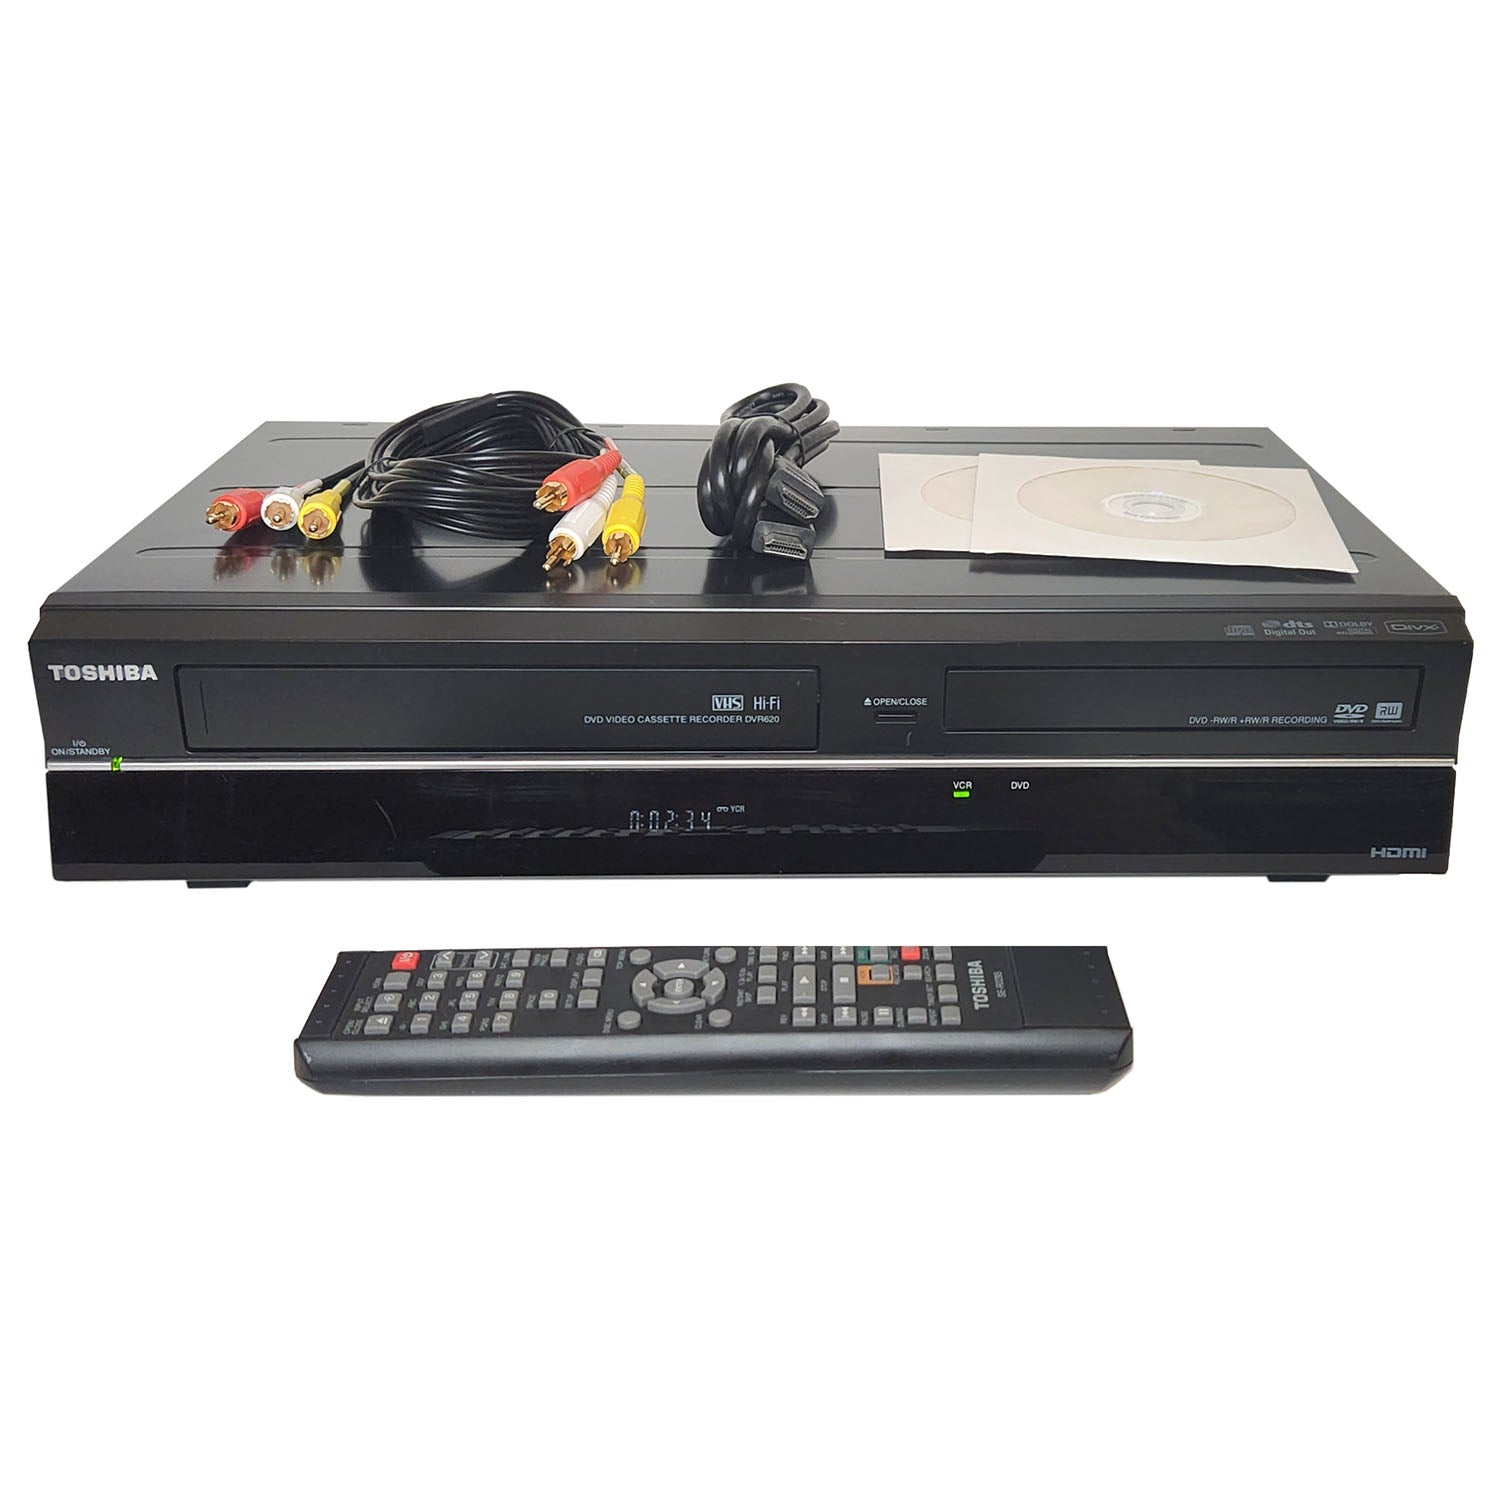 Toshiba DVR620KU VCR/DVD Recorder Combo with HDMI - VHS Tape Teansfer